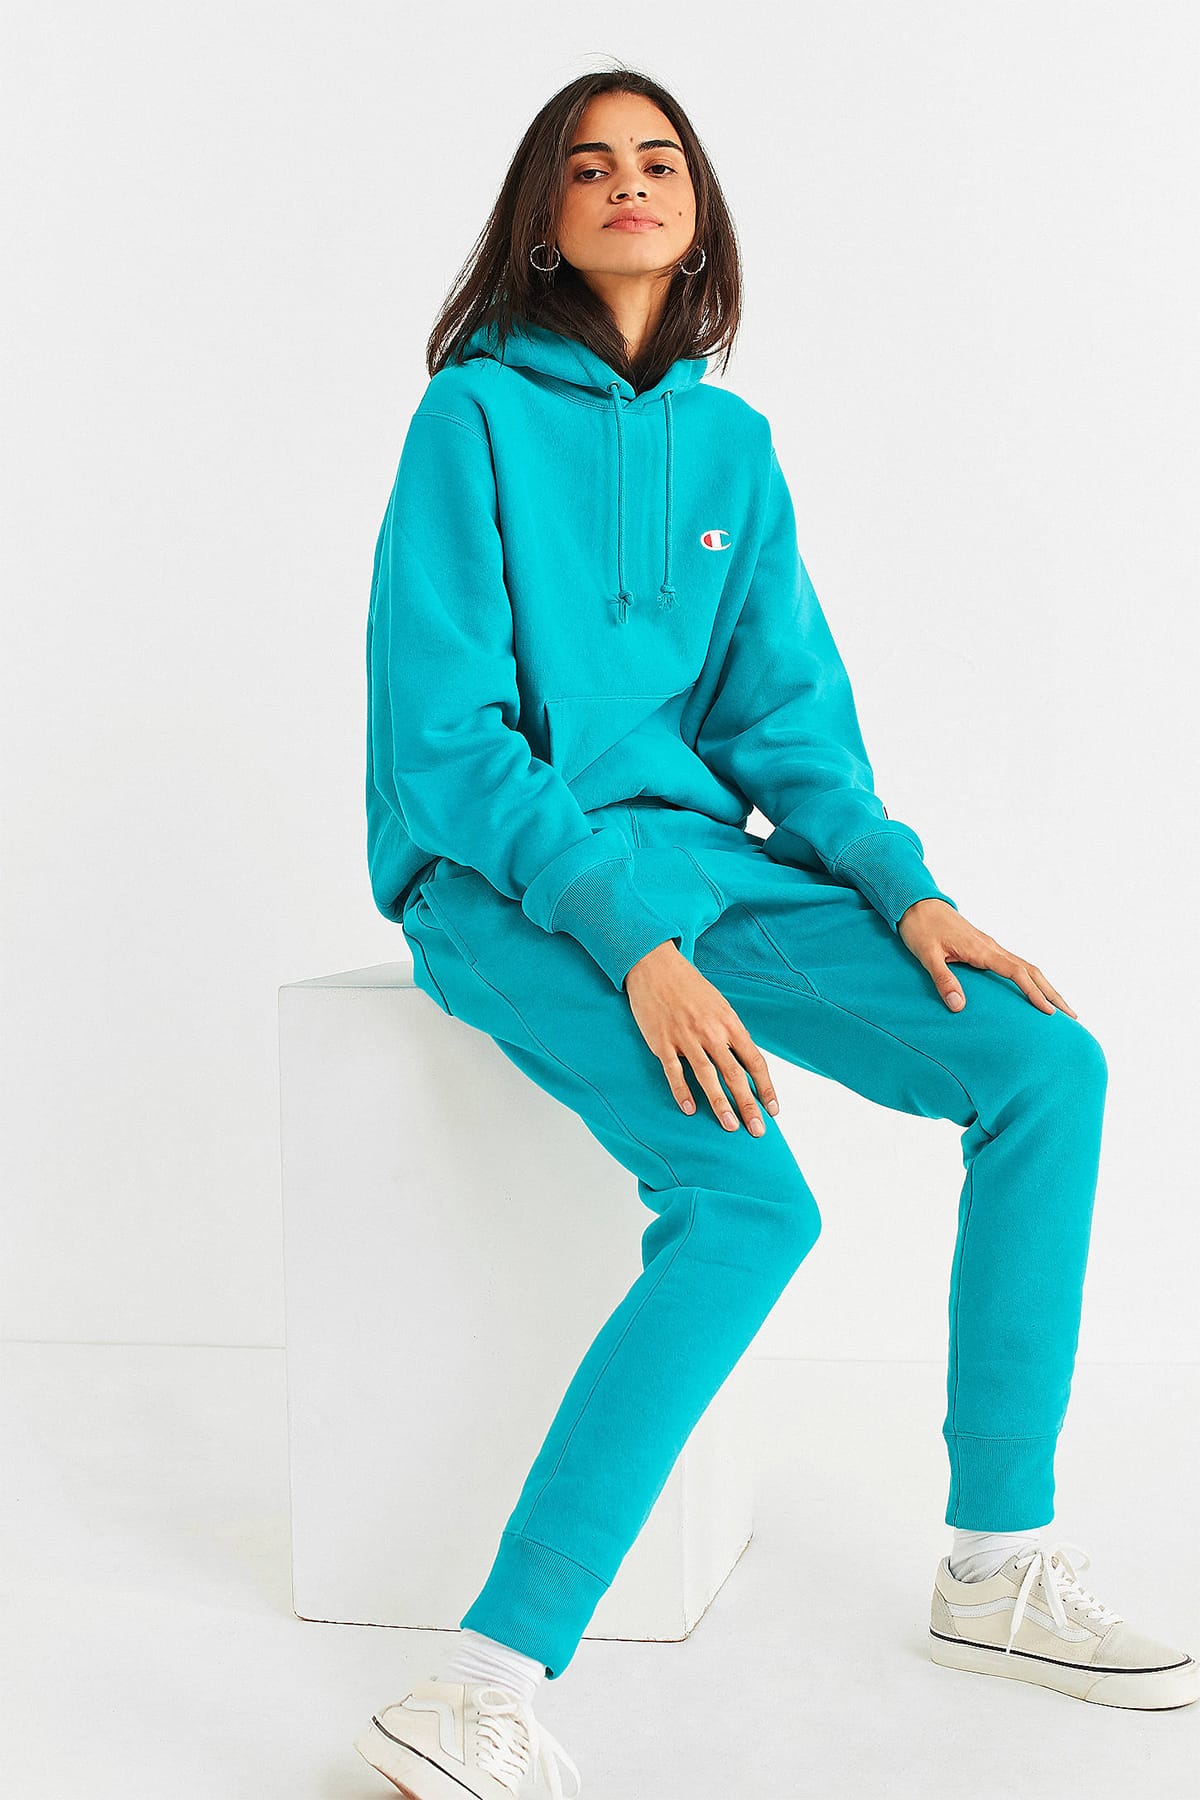 Urban Outfitters Turquoise Hoodie Set 